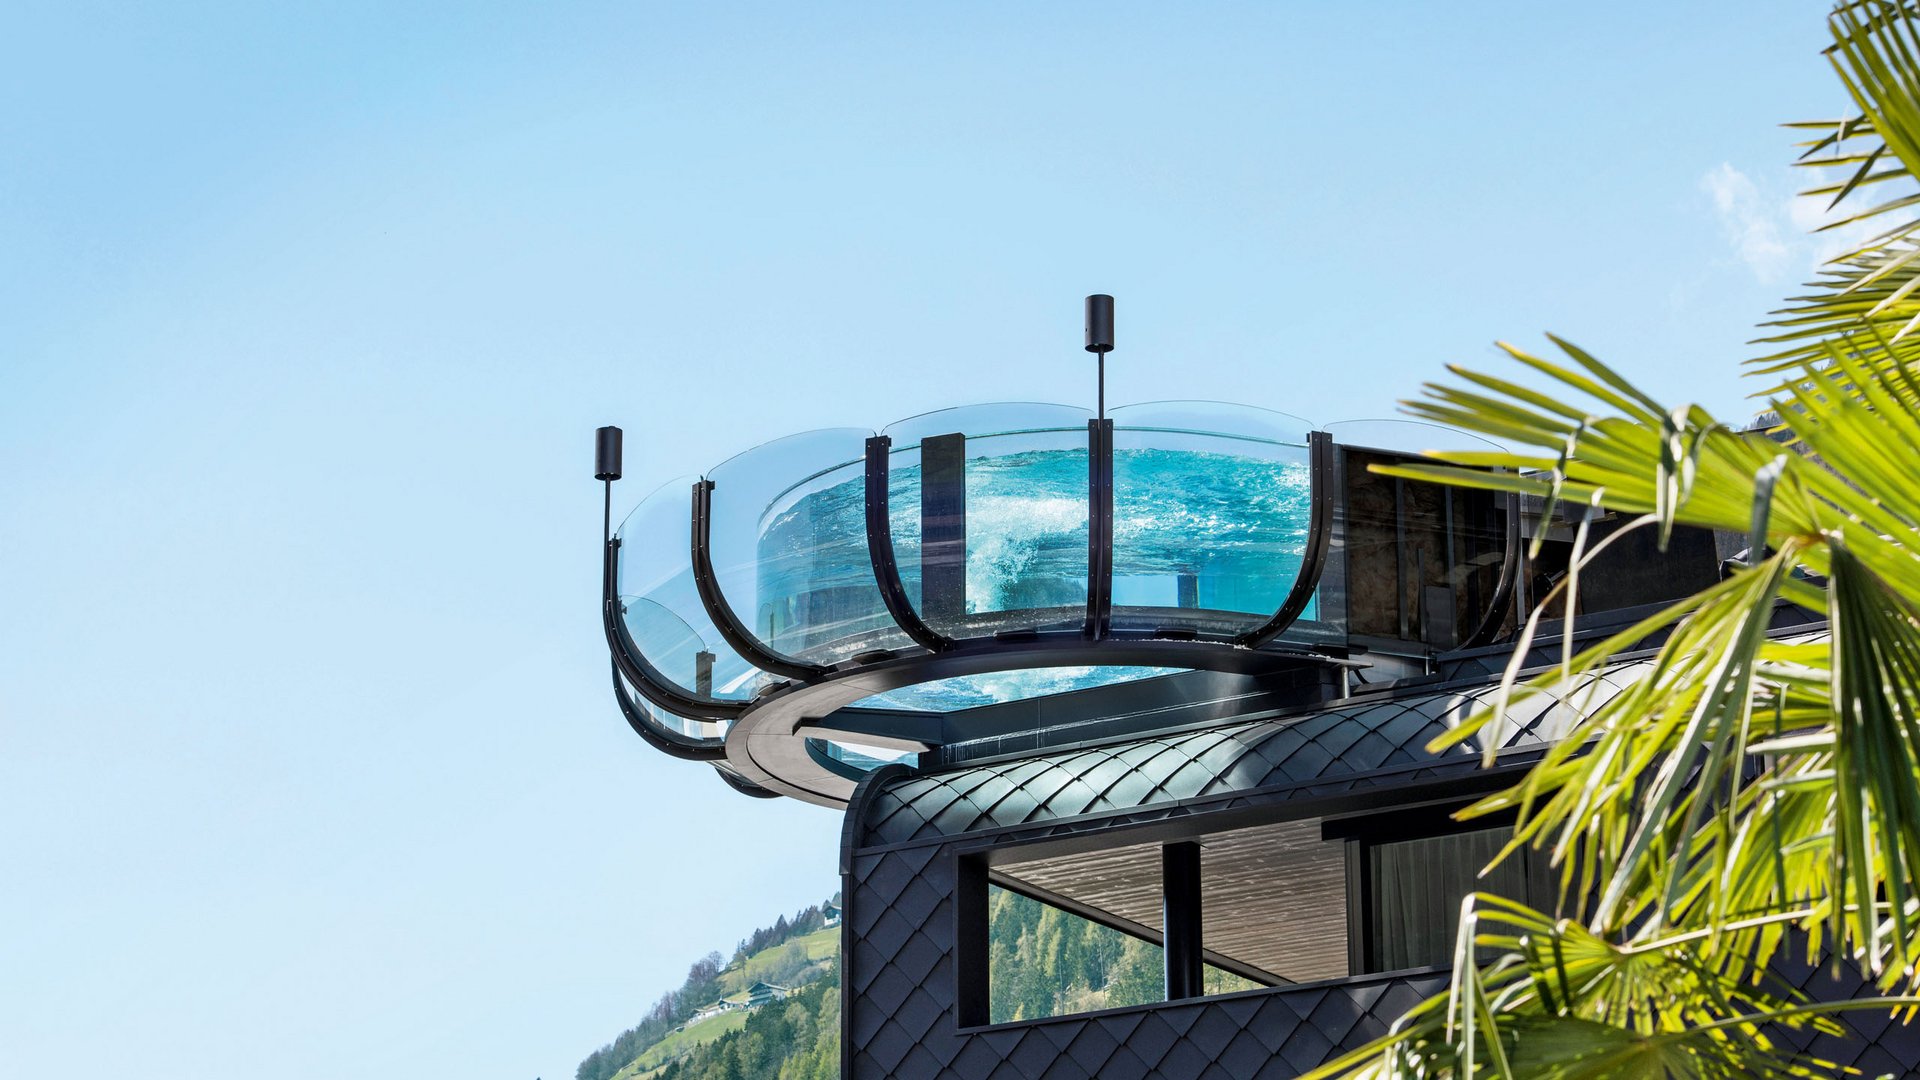 A luxury hotel in South Tyrol where dreams come true